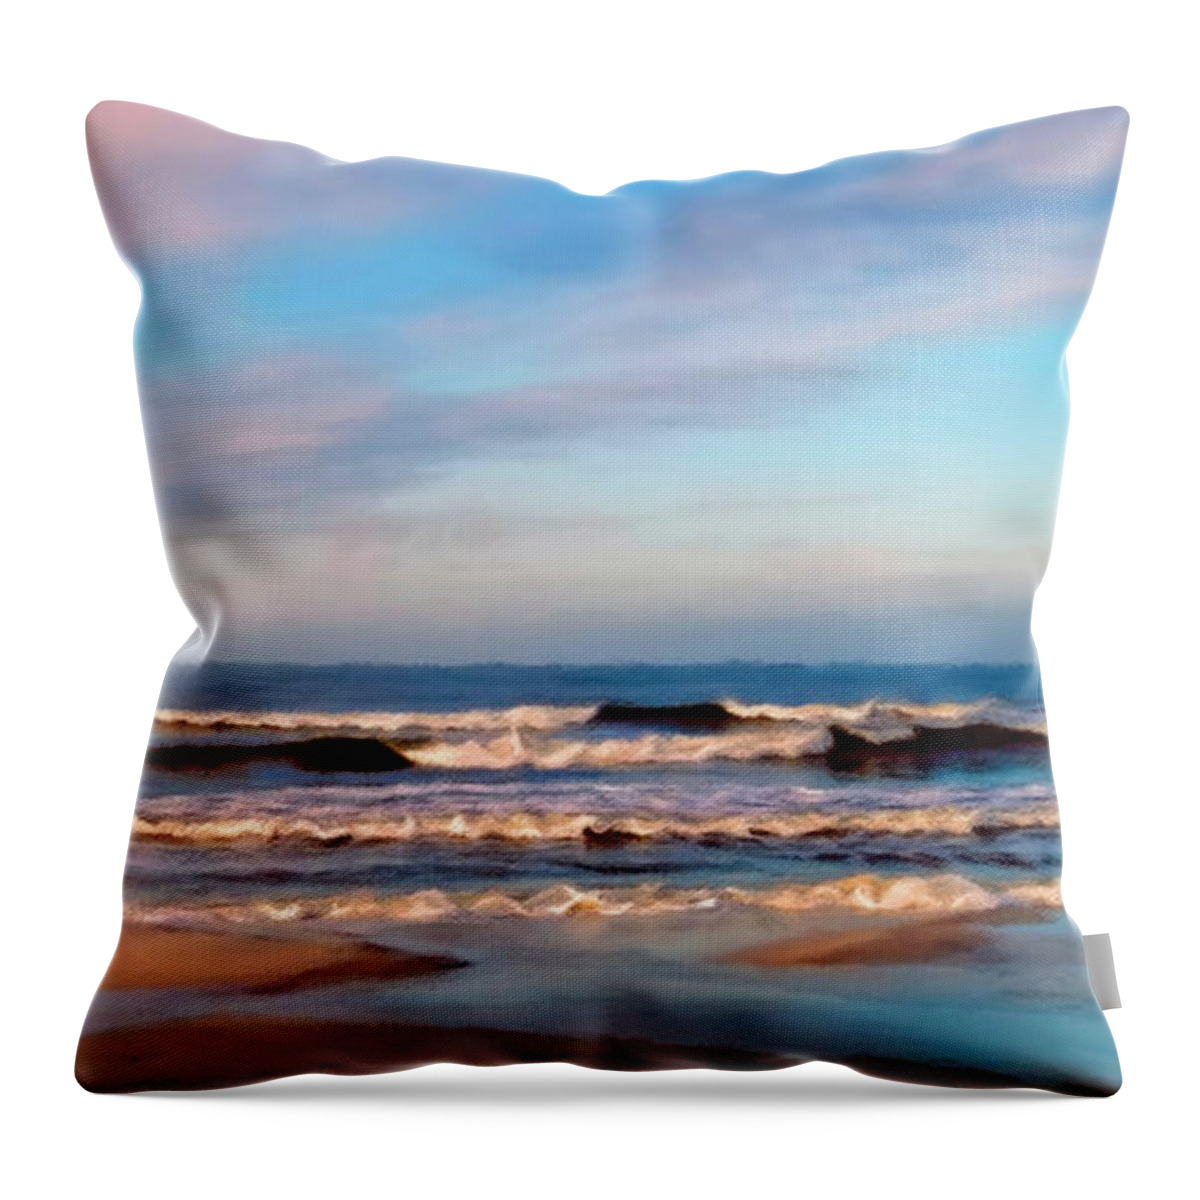 Ocean Throw Pillow featuring the painting Low Waves At Sunrise by Jai Johnson